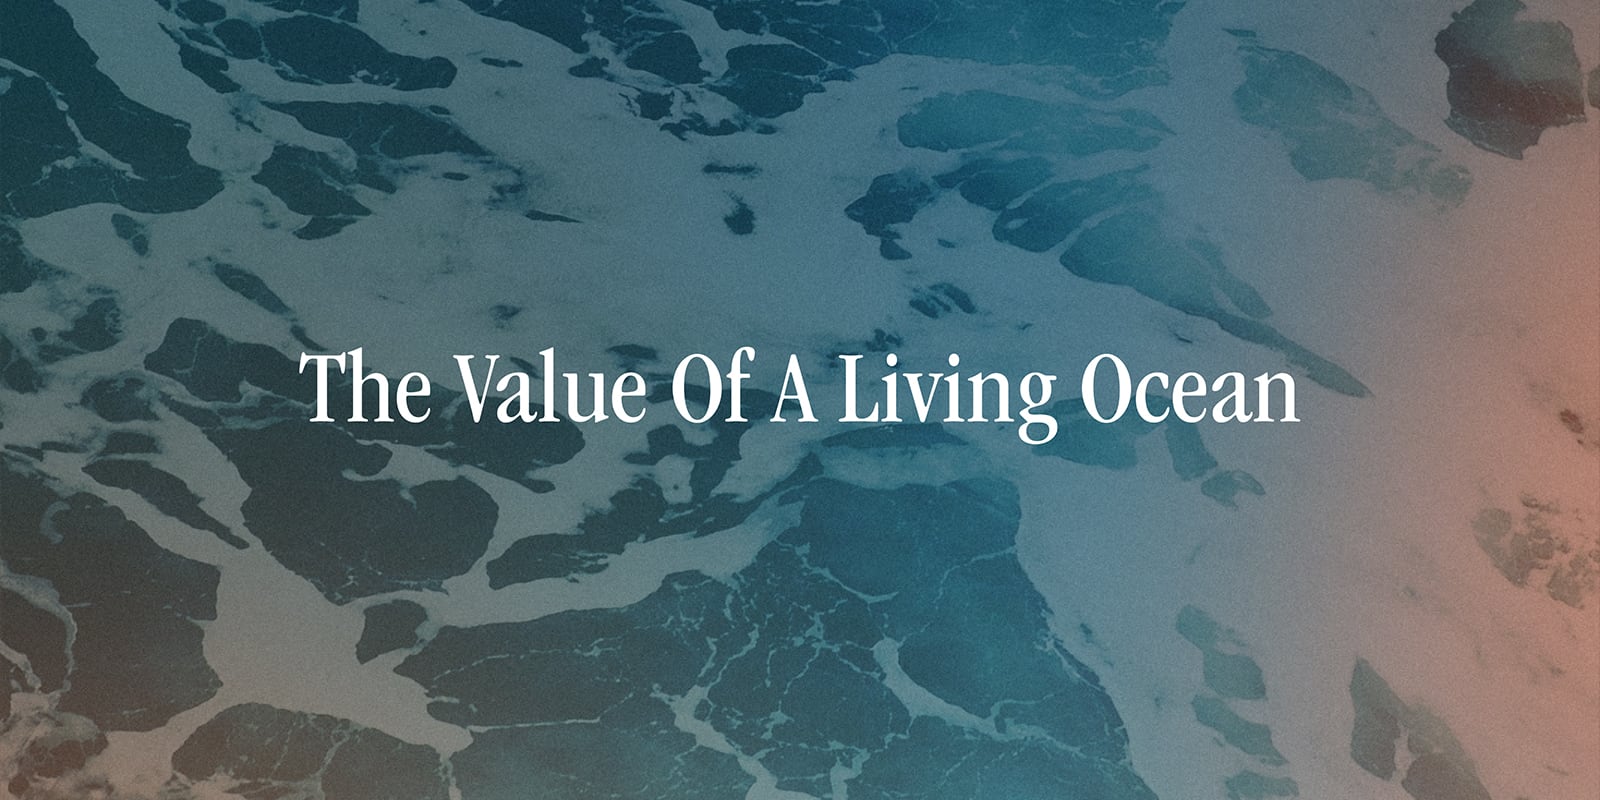 The Value of a Living Ocean